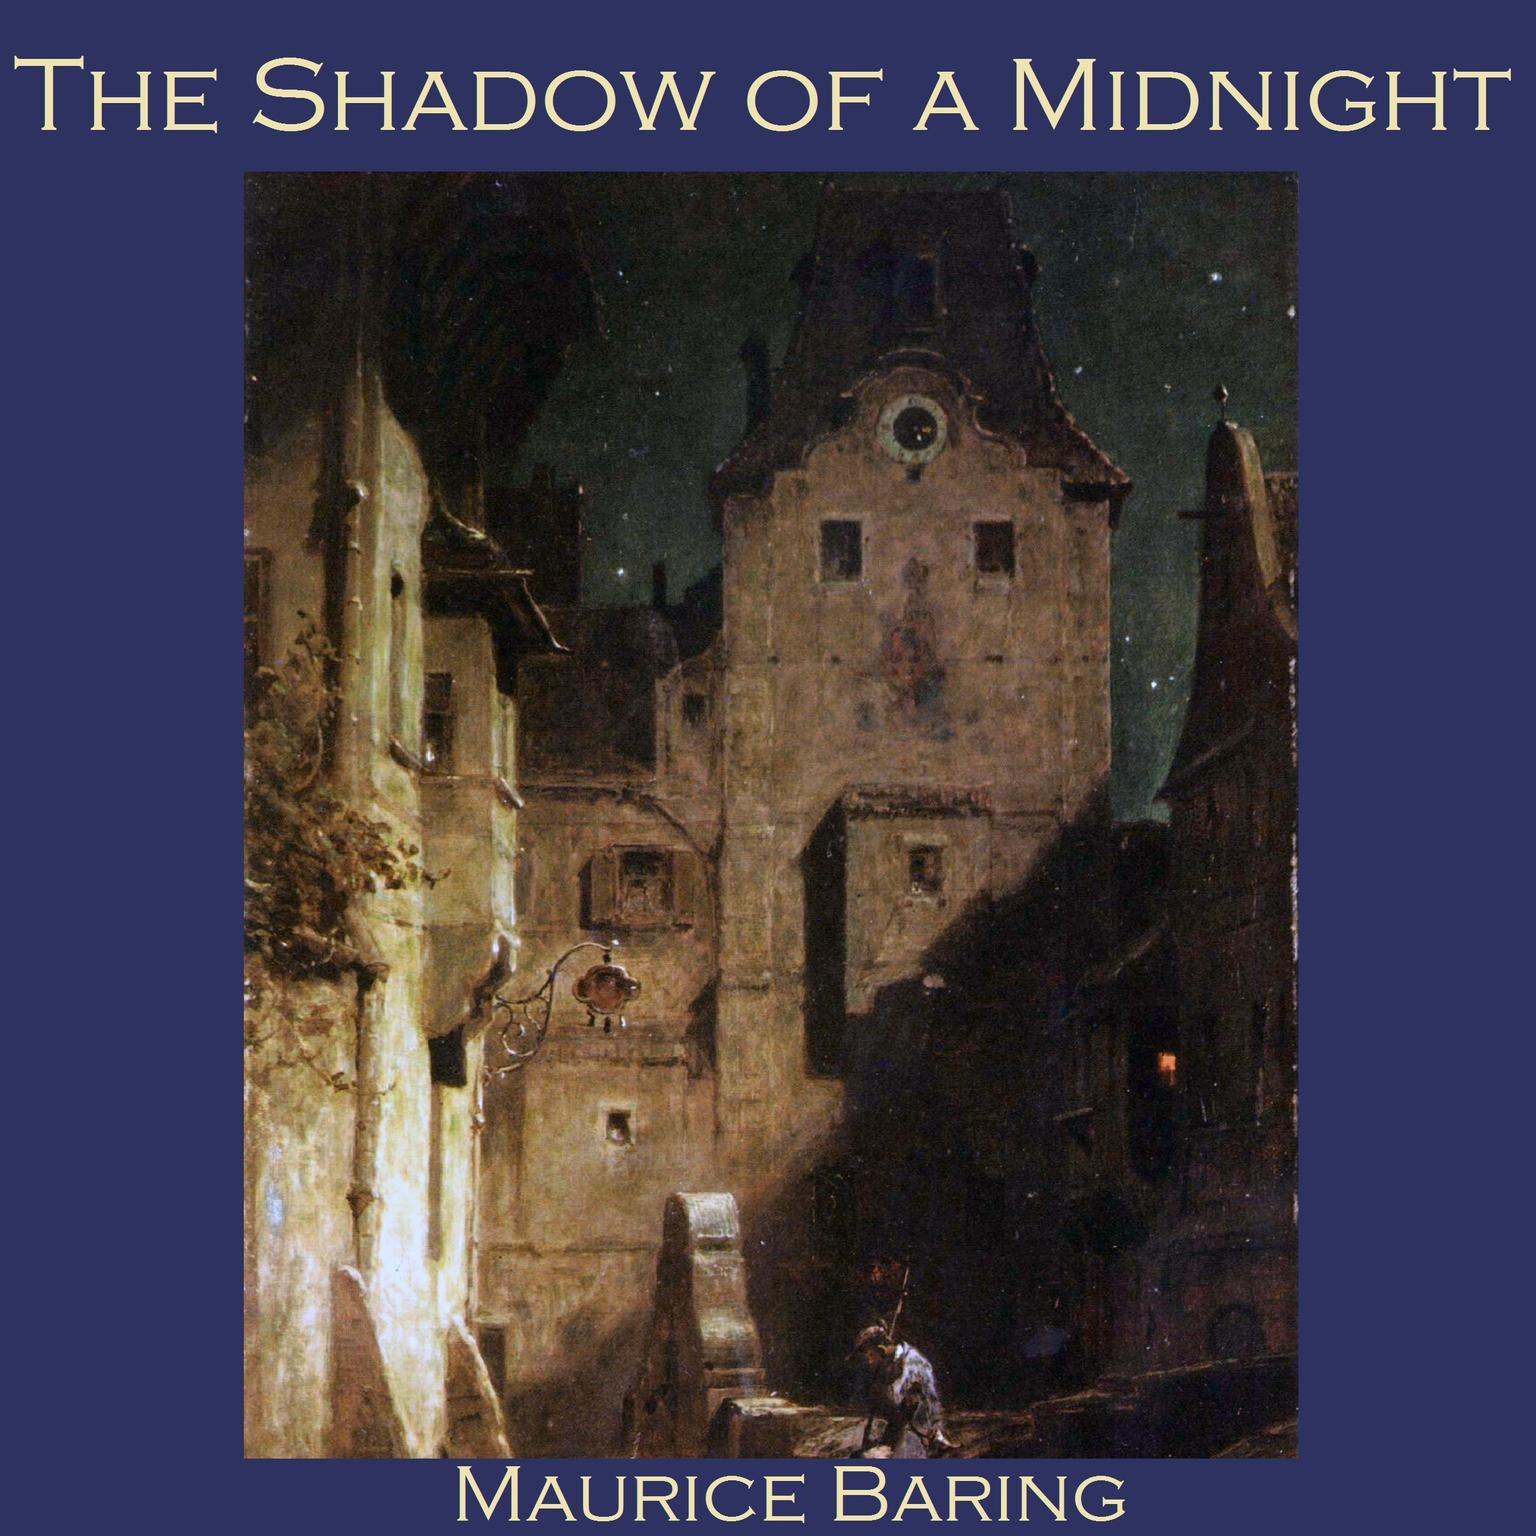 The Shadow of a Midnight Audiobook, by Maurice Baring